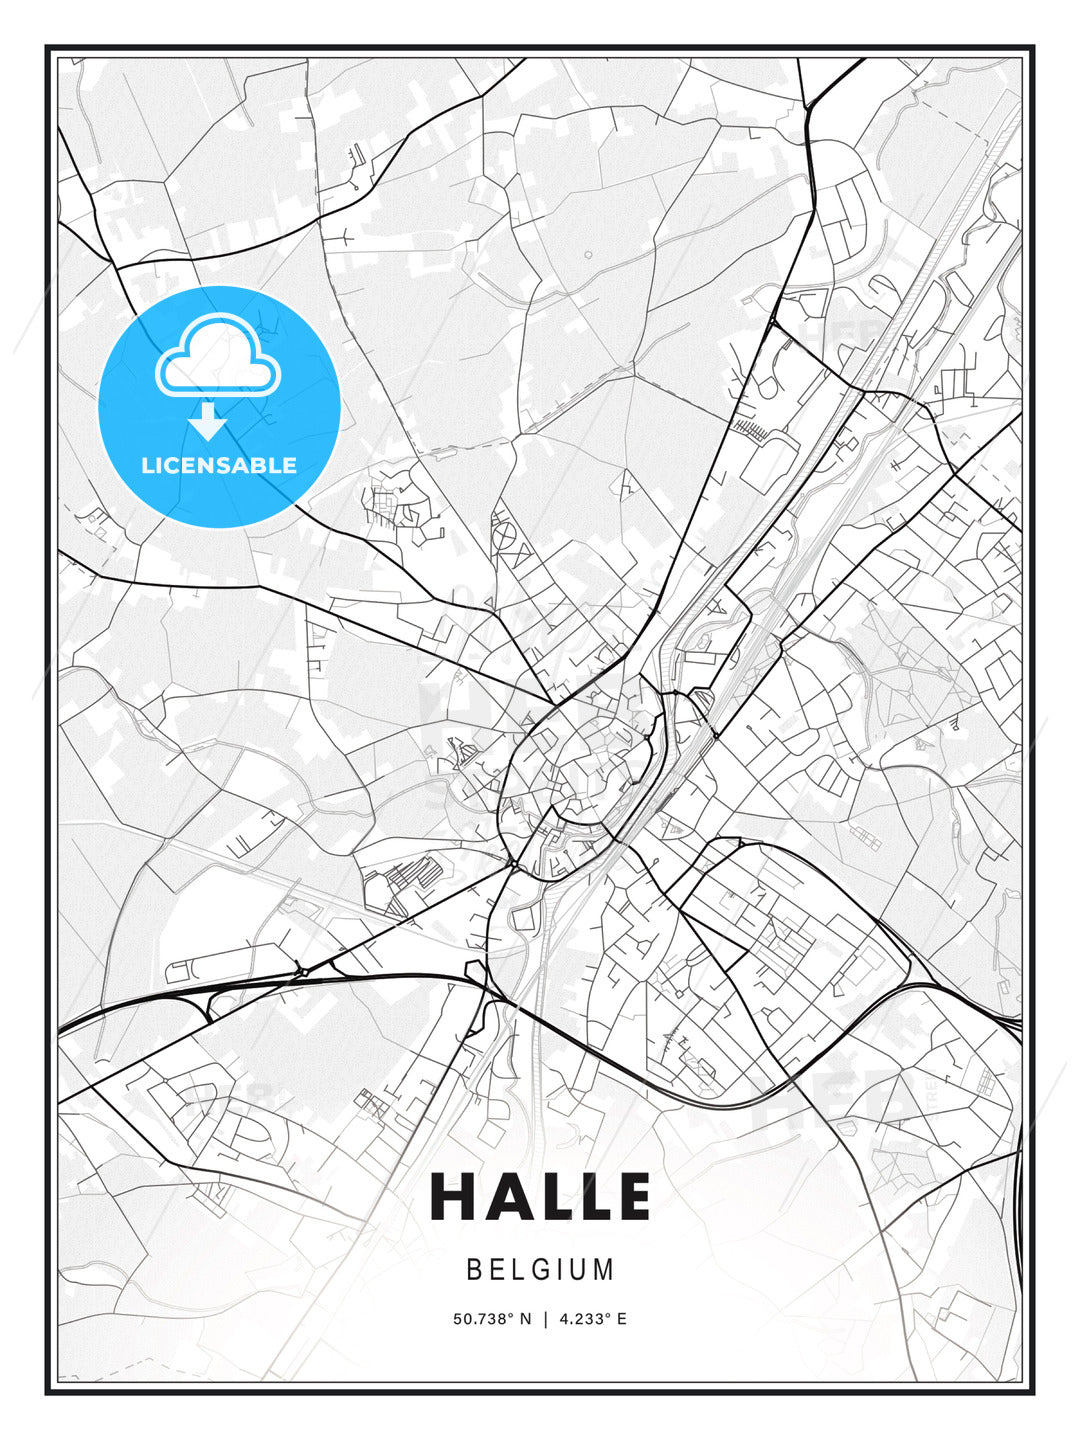 Halle, Belgium, Modern Print Template in Various Formats - HEBSTREITS Sketches